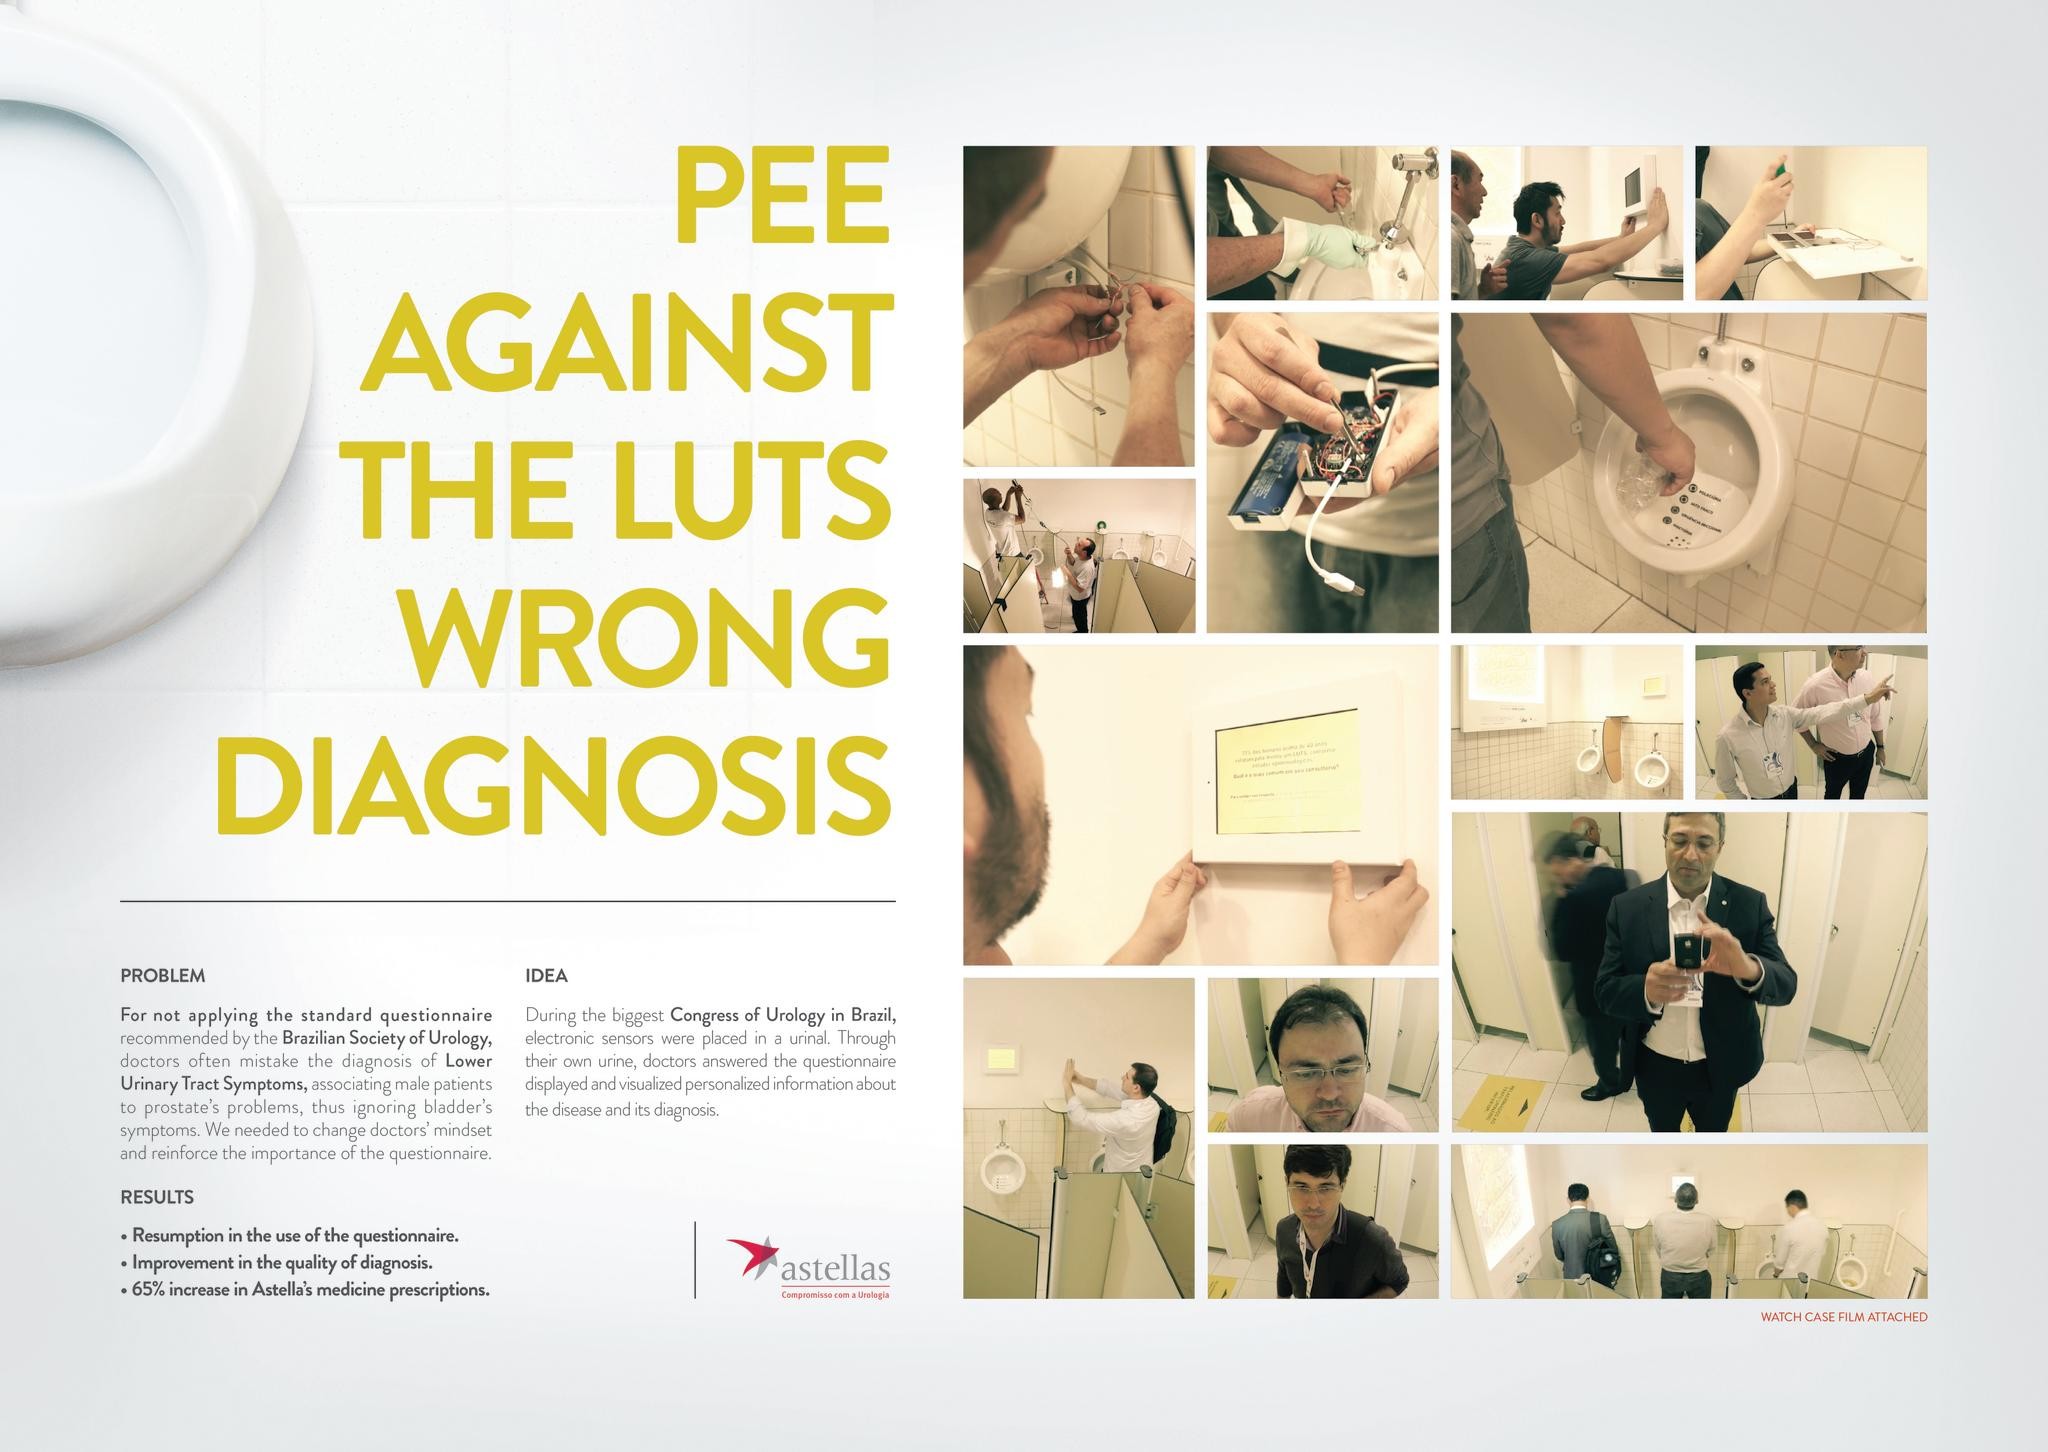 PEE AGAINST THE LUTS WRONG DIAGNOSIS